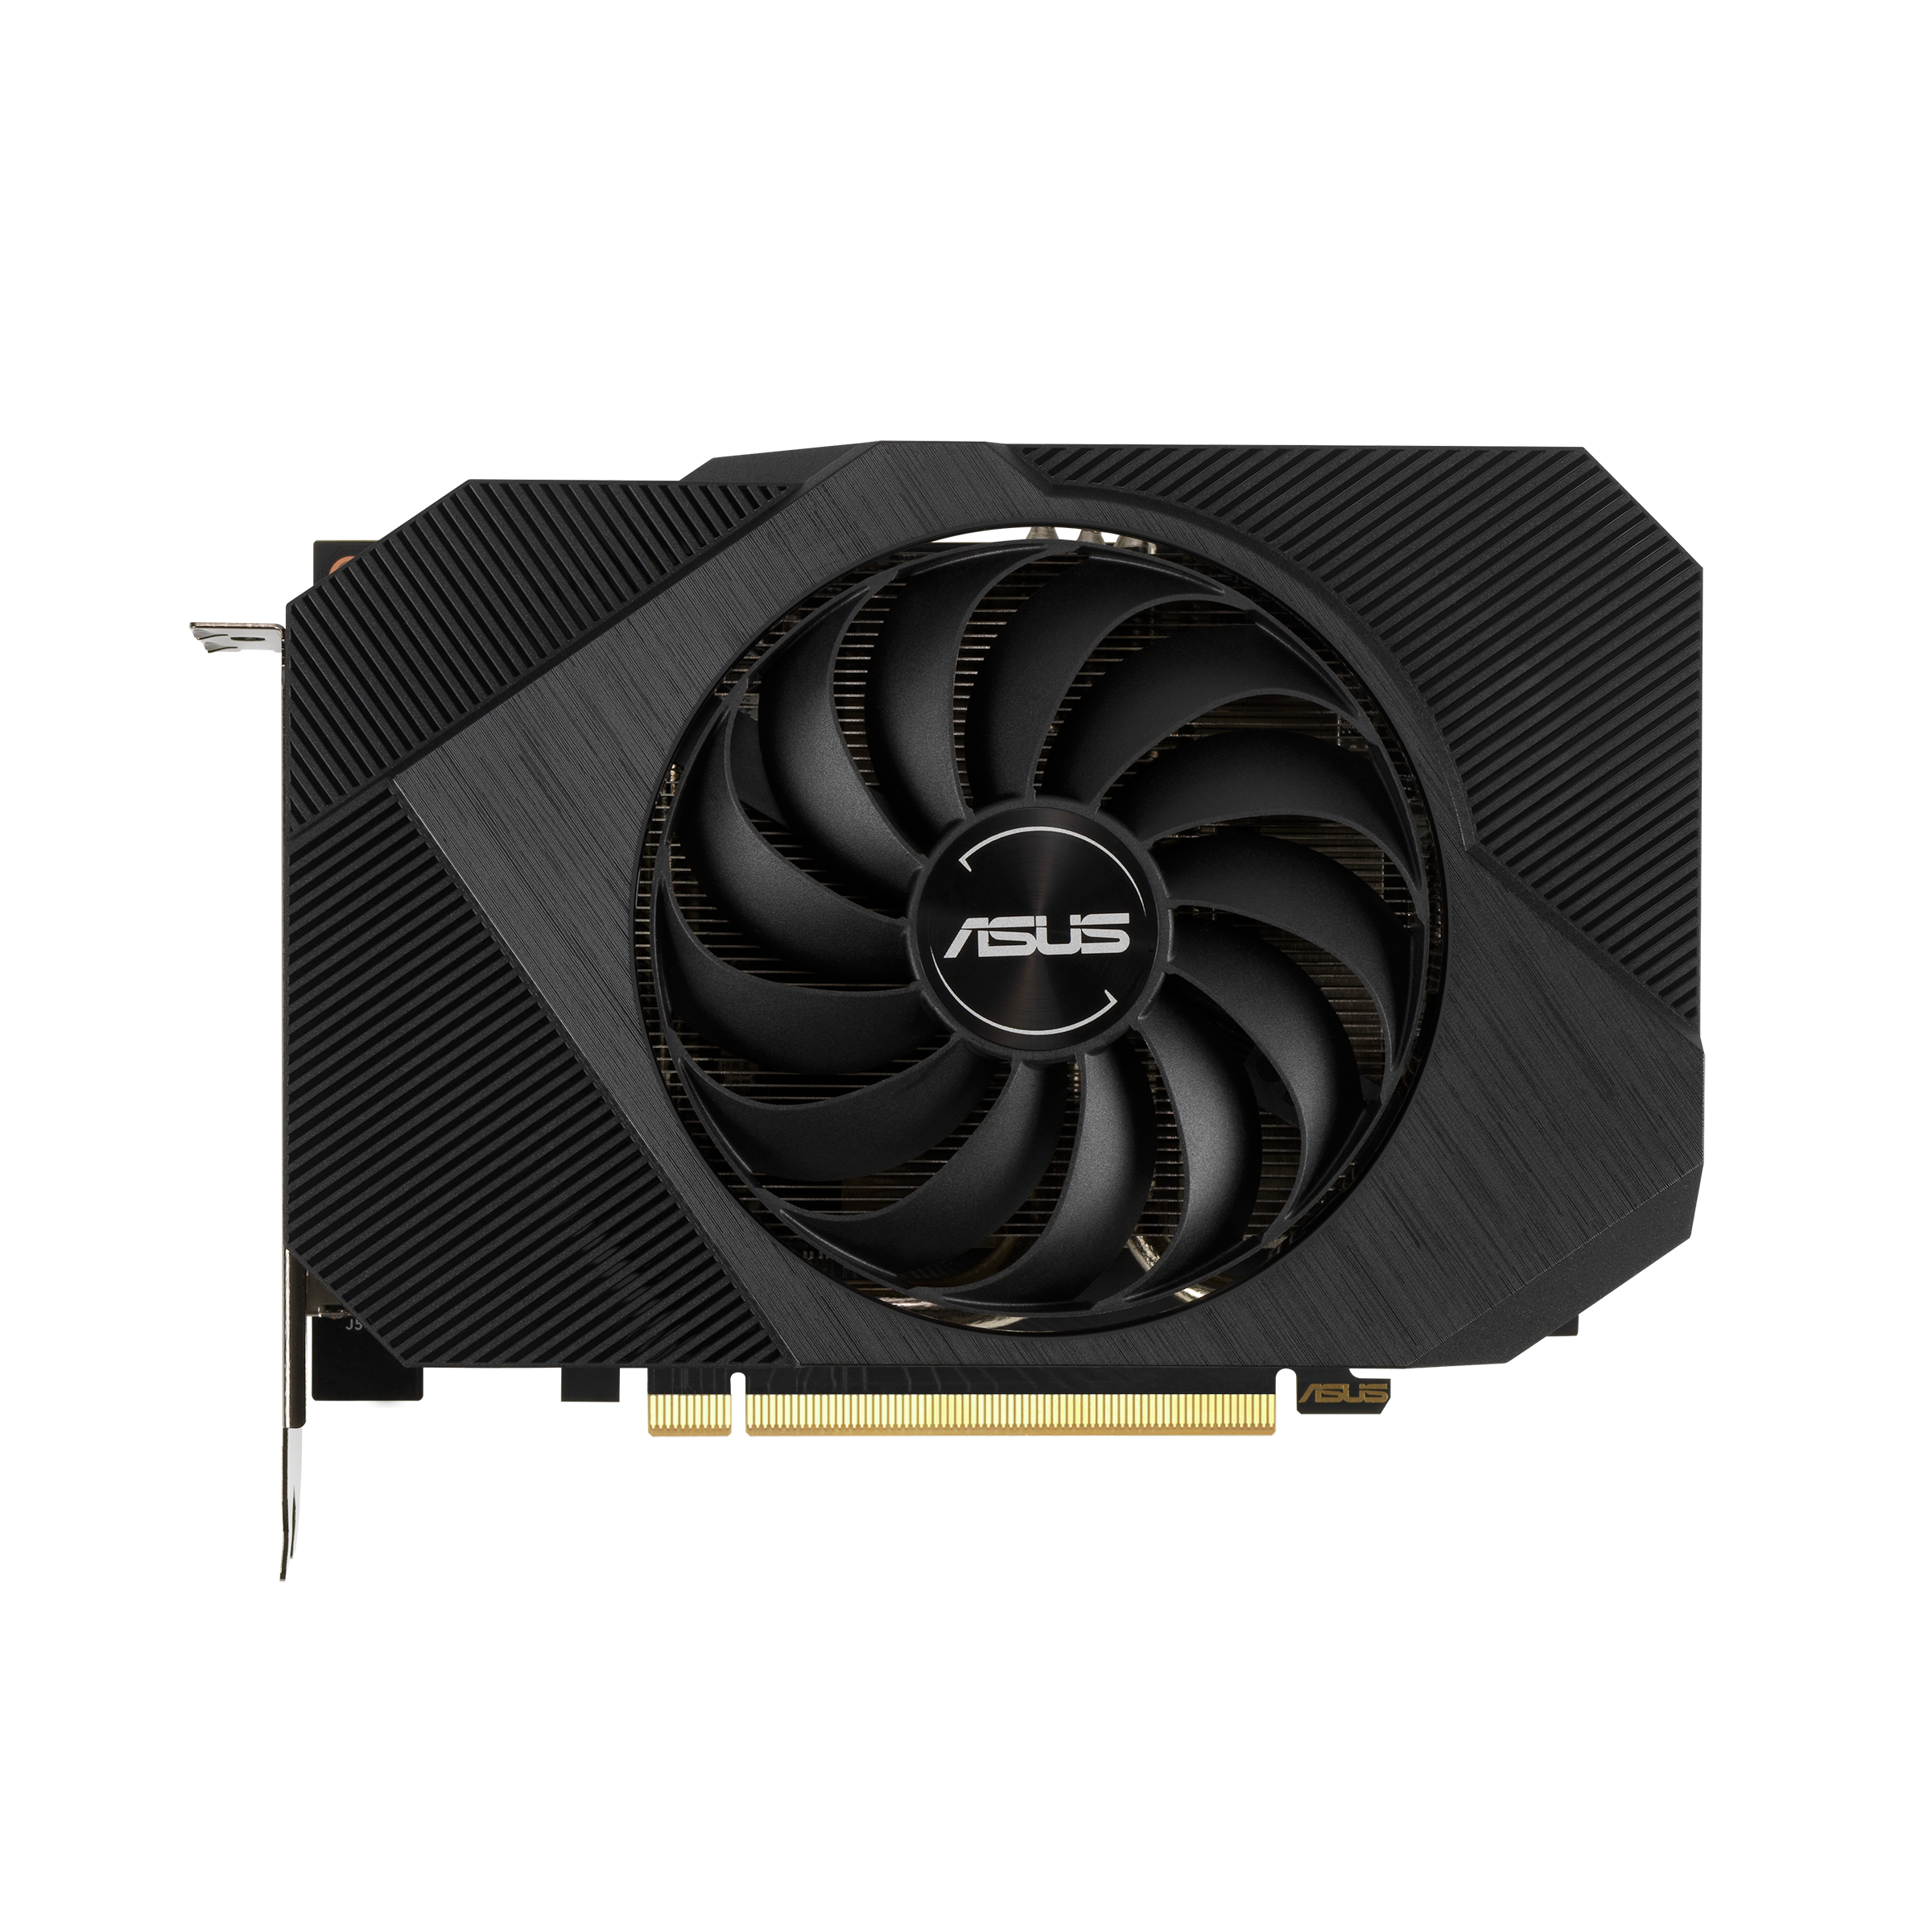 PH-RTX3060-12G-V2 - Online store｜Graphics Cards｜ASUS USA